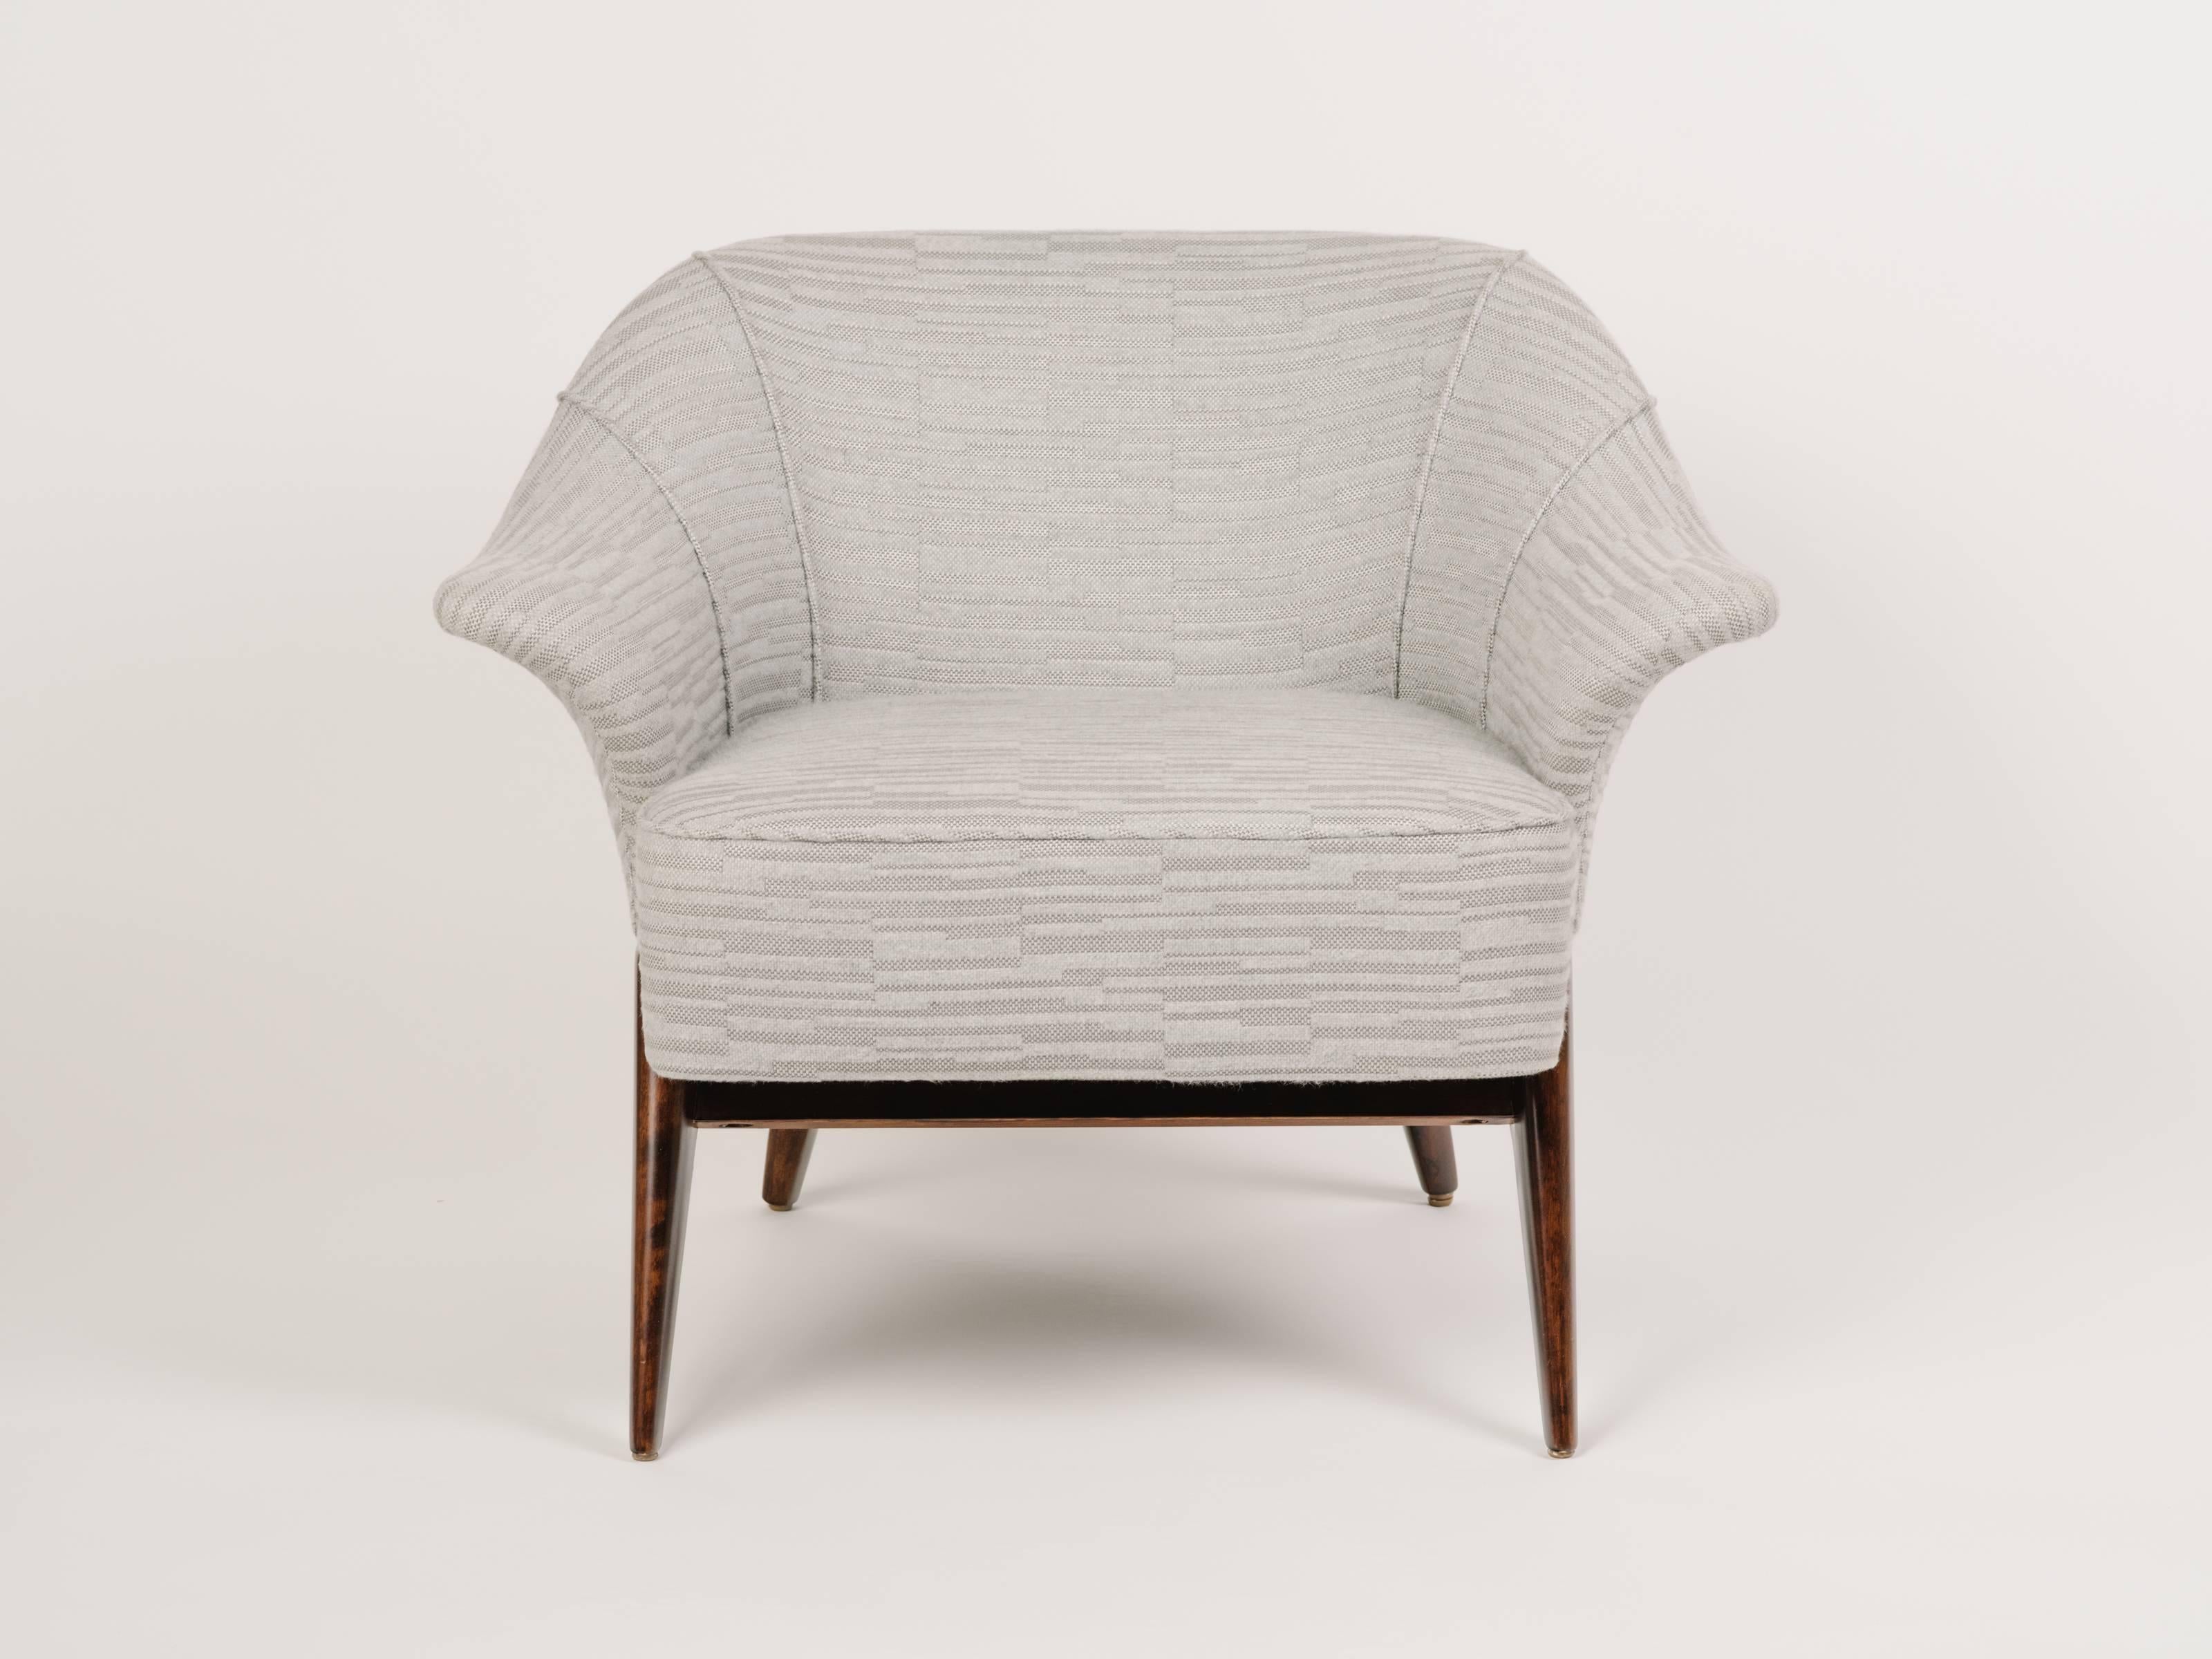 Outstanding Mid-Century Modern lounge chair with sculptural form. The chair has barrel form with winged swan sides and striking maple wood frame. Newly restored and upholstered in woven and embossed cotton-wool fabric with geometric pattern in light